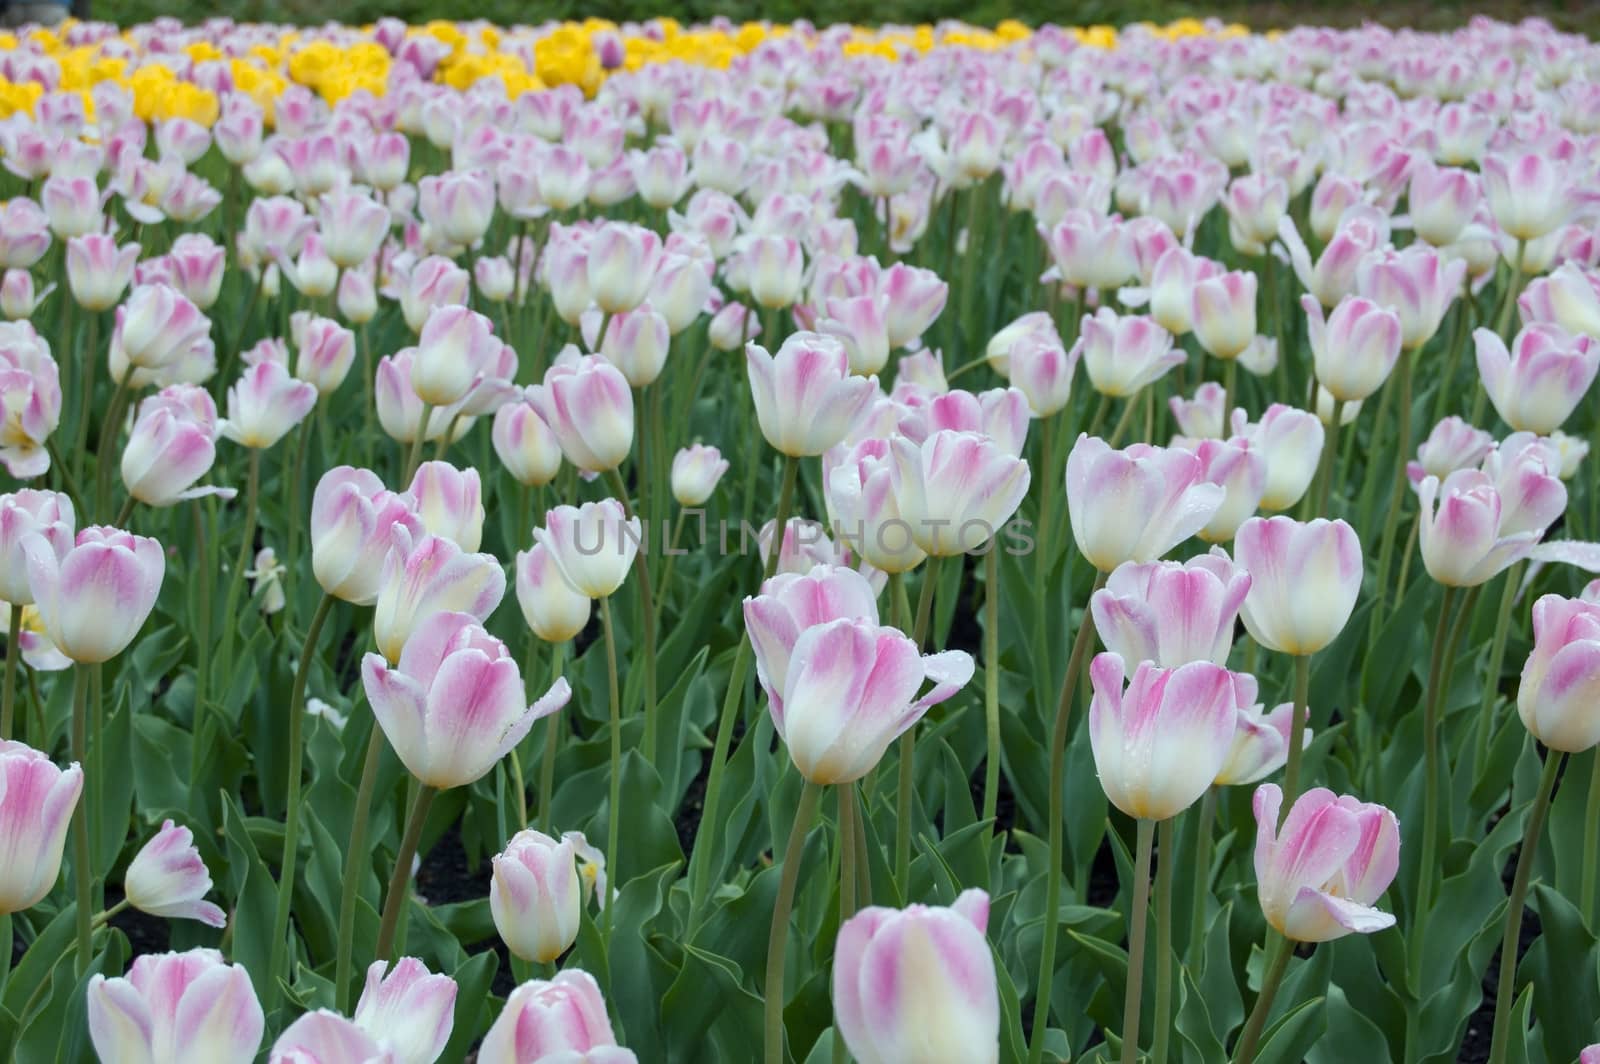  pink and white tulips by PavelS